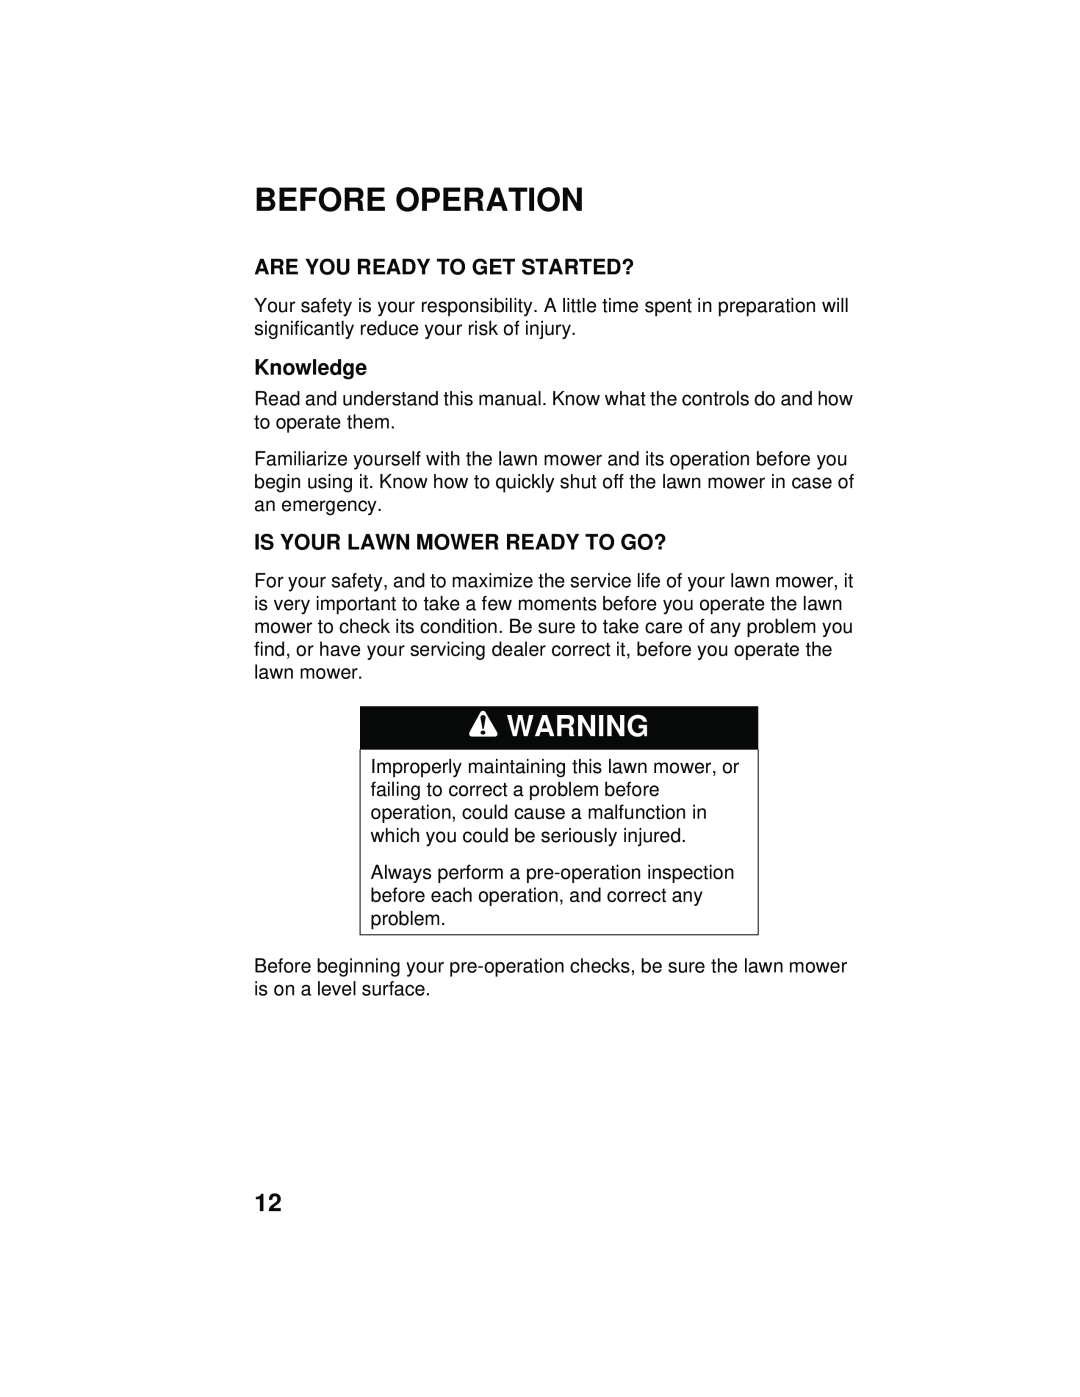 Honda Power Equipment HRB216TXA owner manual Before Operation, Are You Ready To Get Started?, Knowledge 